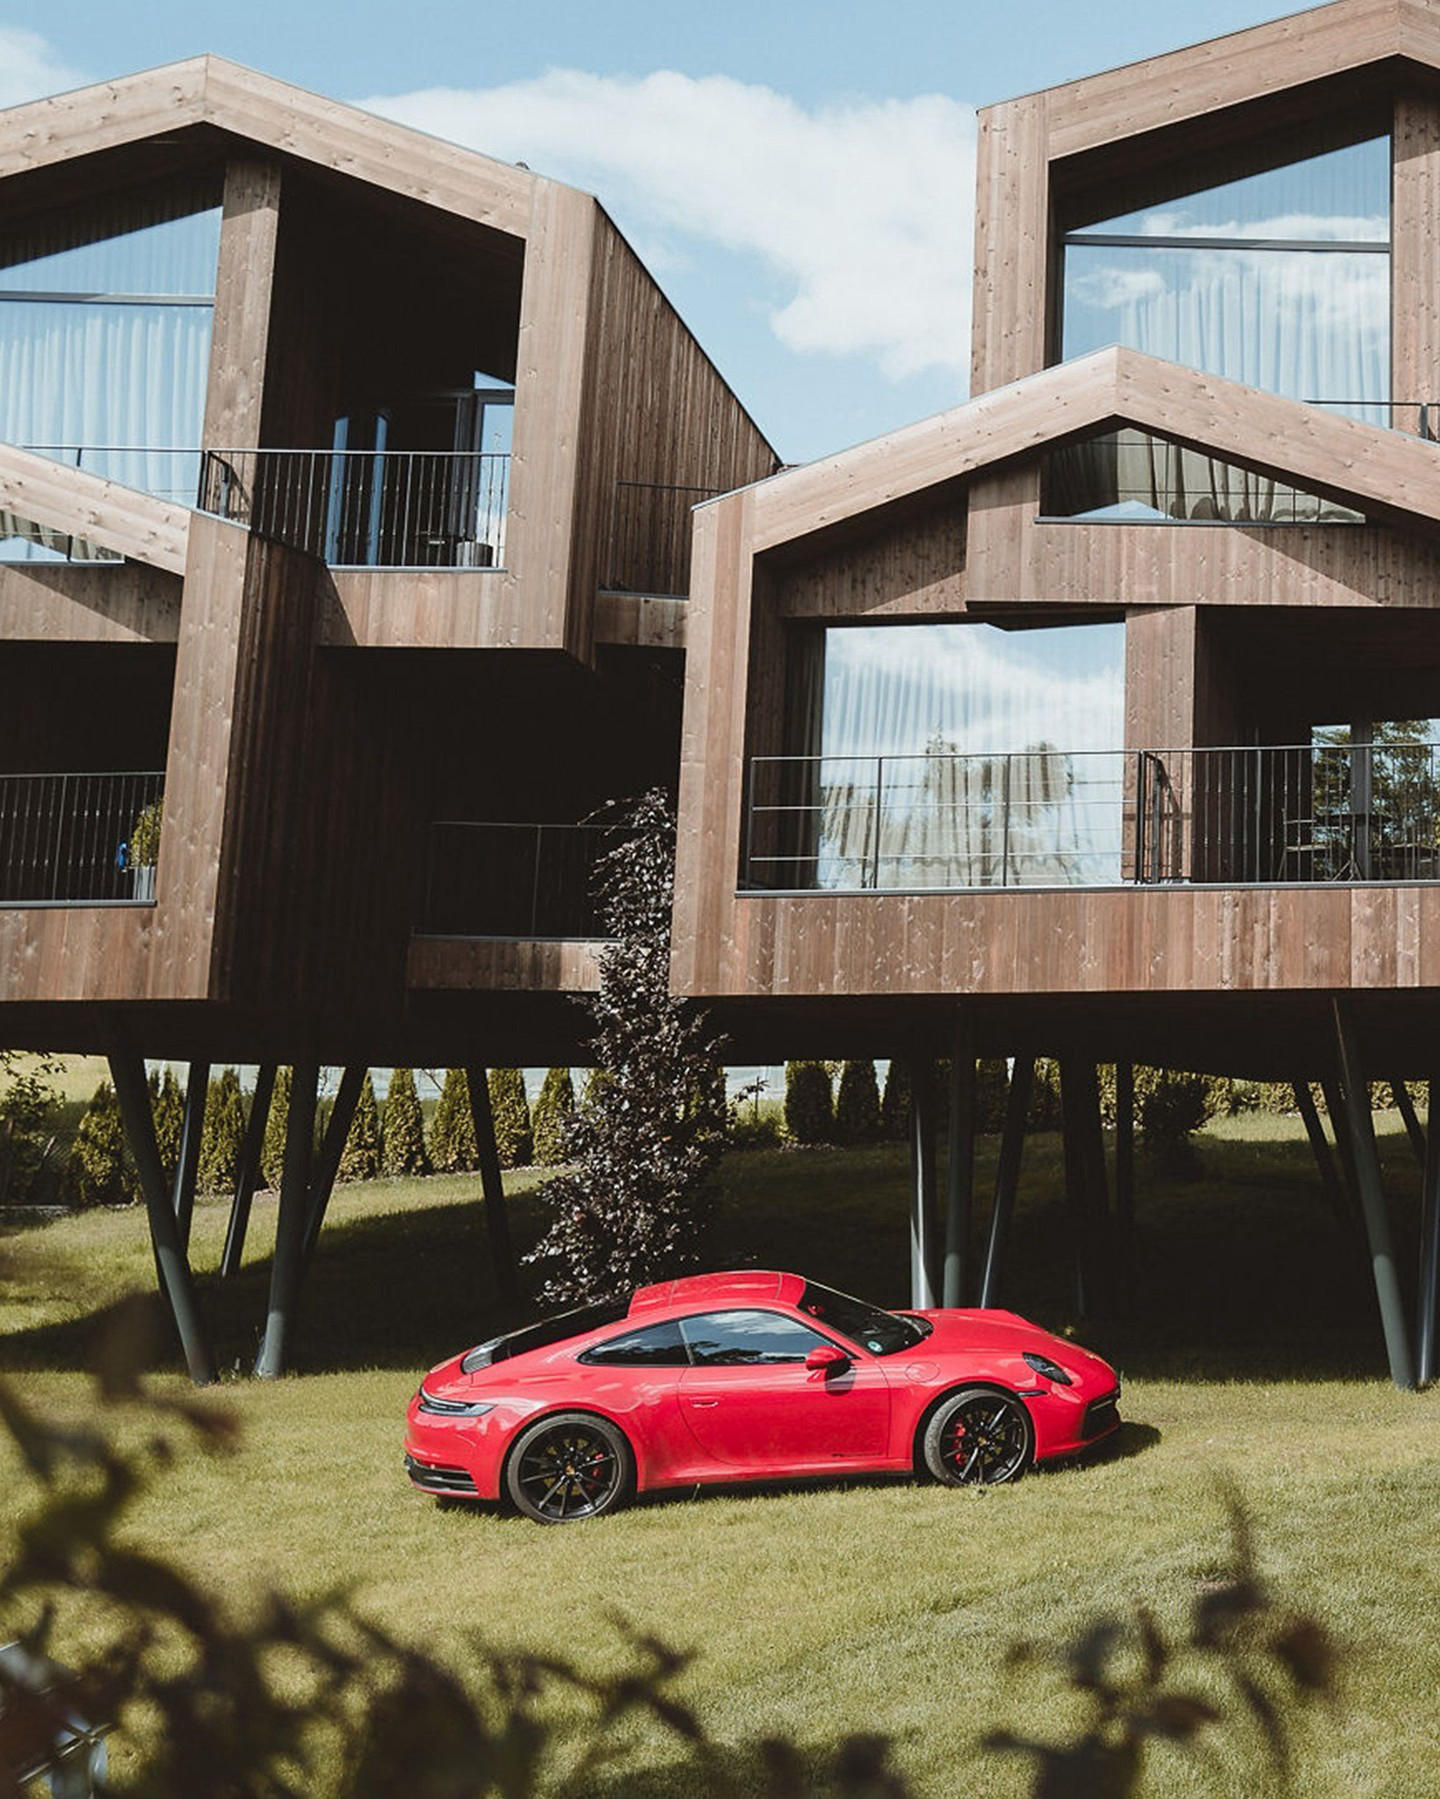 image  1 Porsche - Take a sustainable Alpine tour and greet sustainable buildings that blend beautifully with